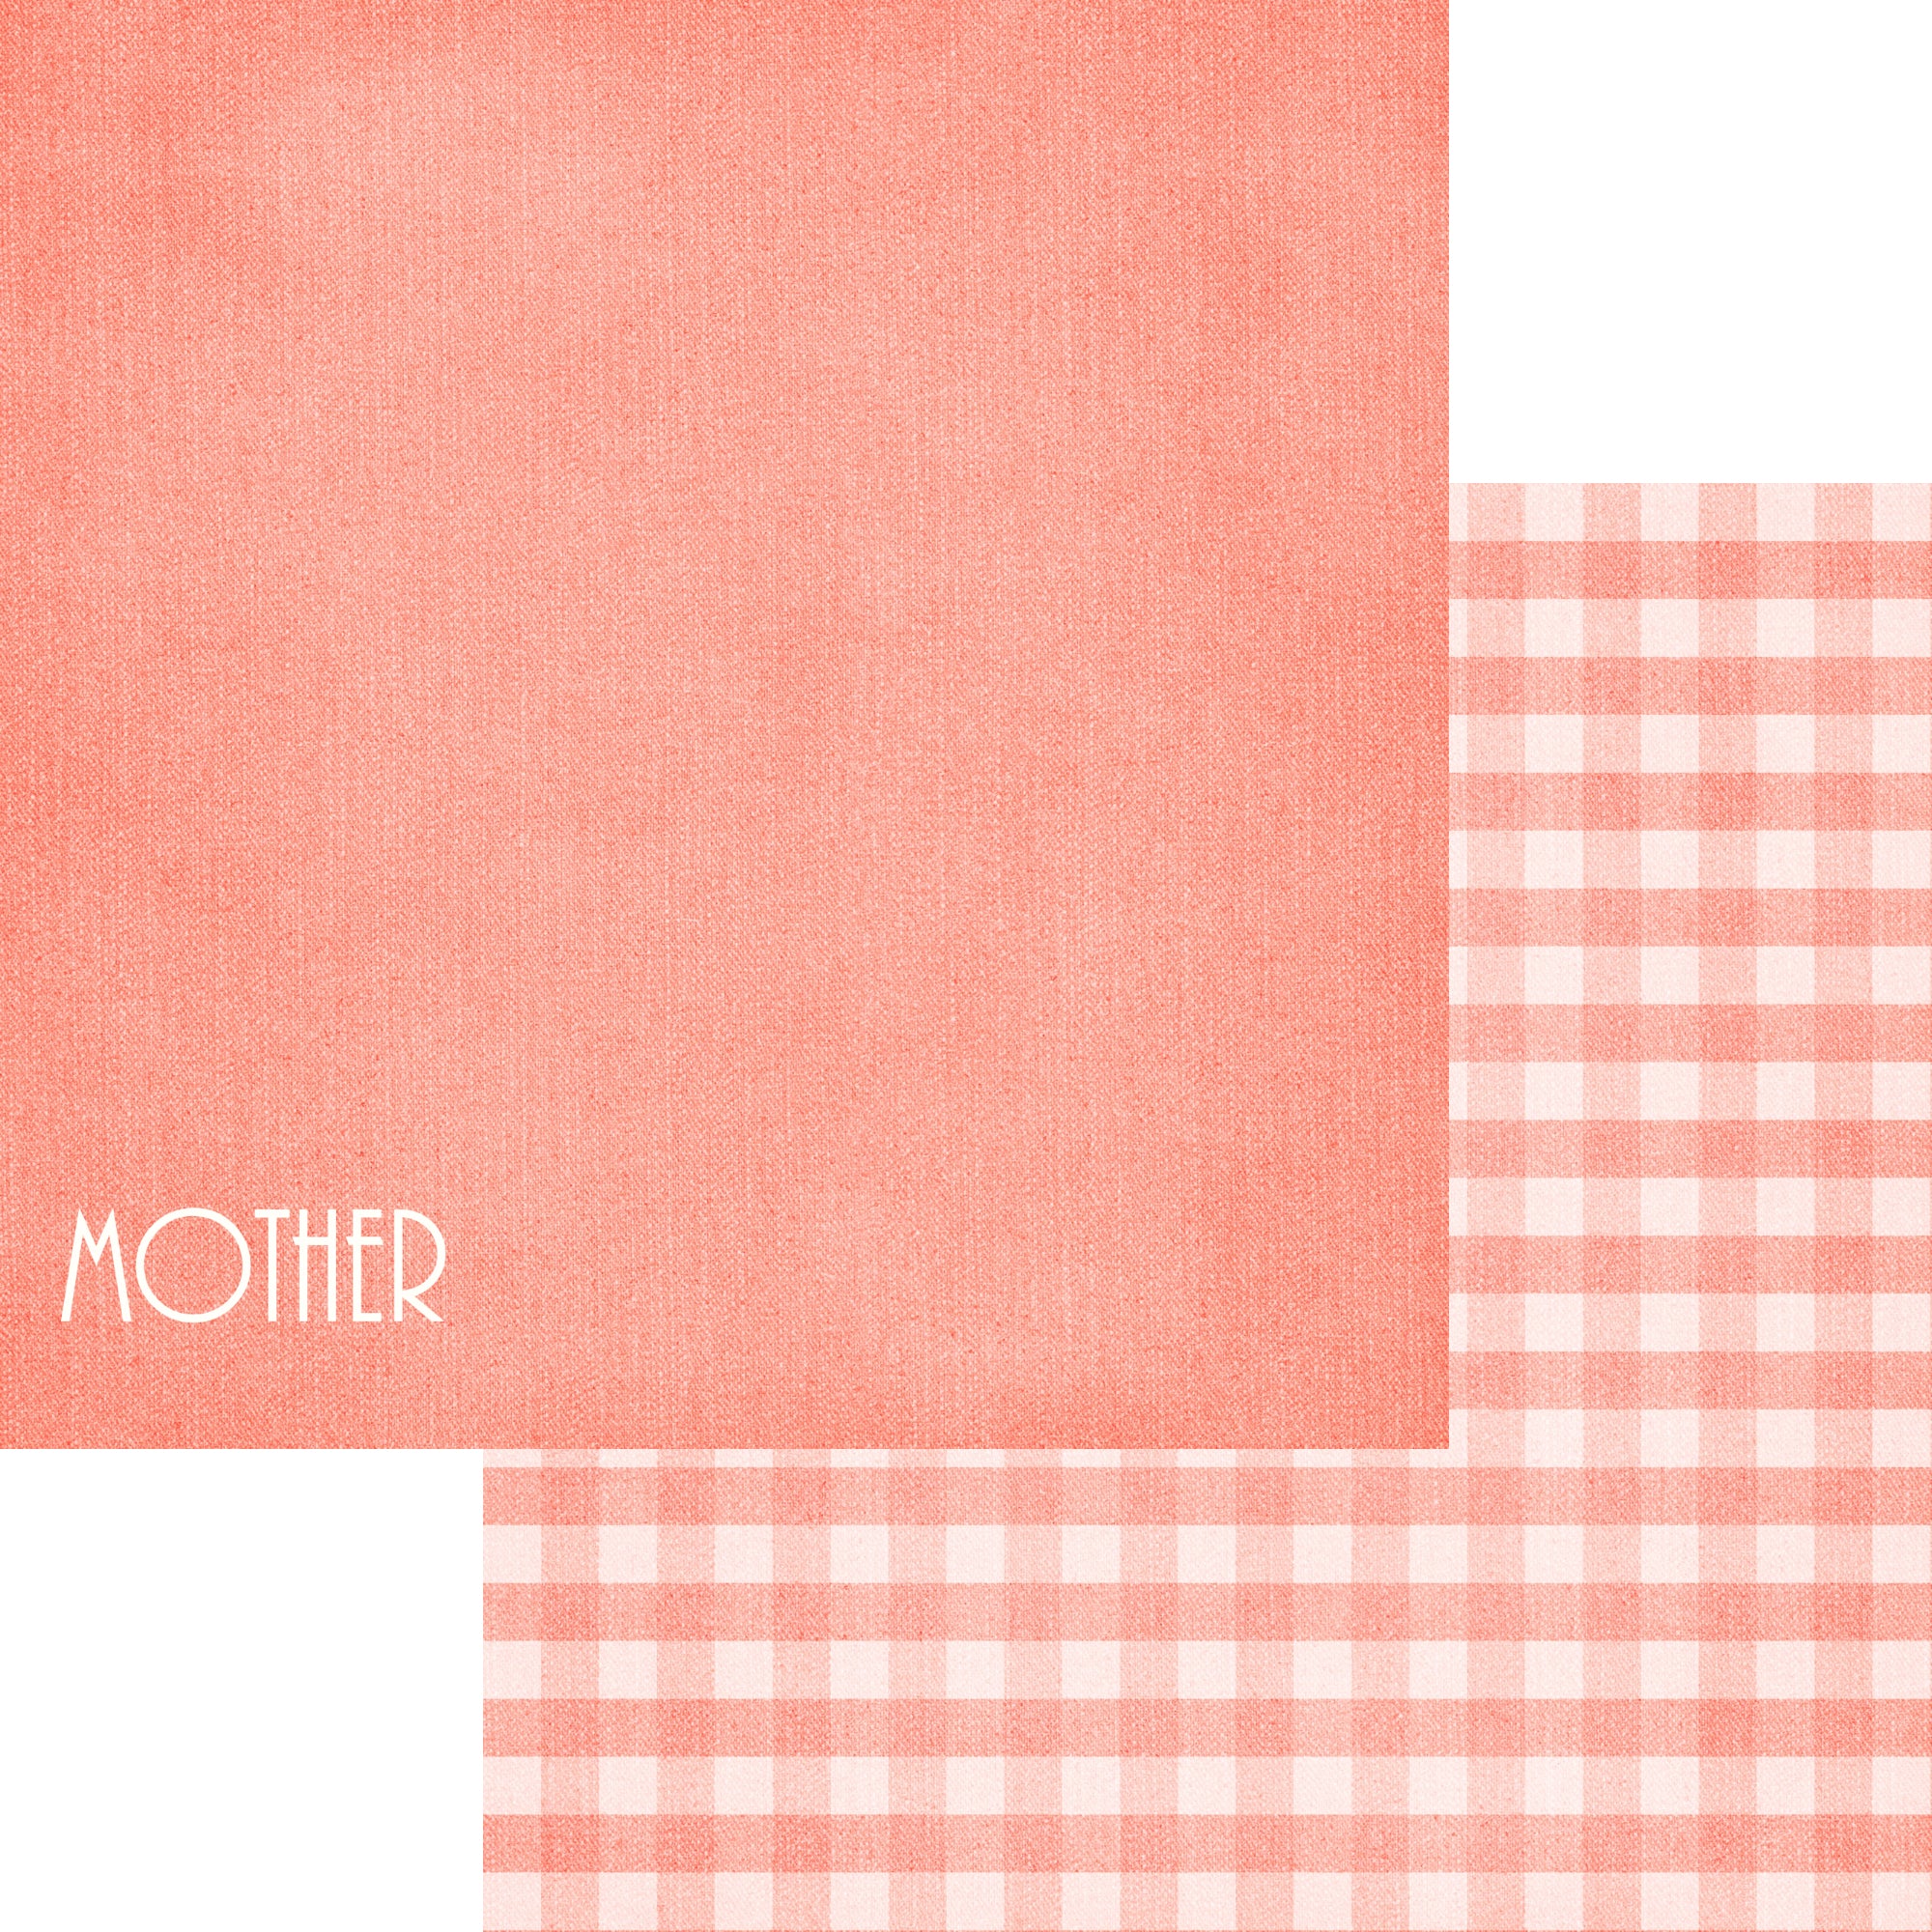 Family Collection Mother 12 x 12 Double-Sided Scrapbook Paper by SSC Designs